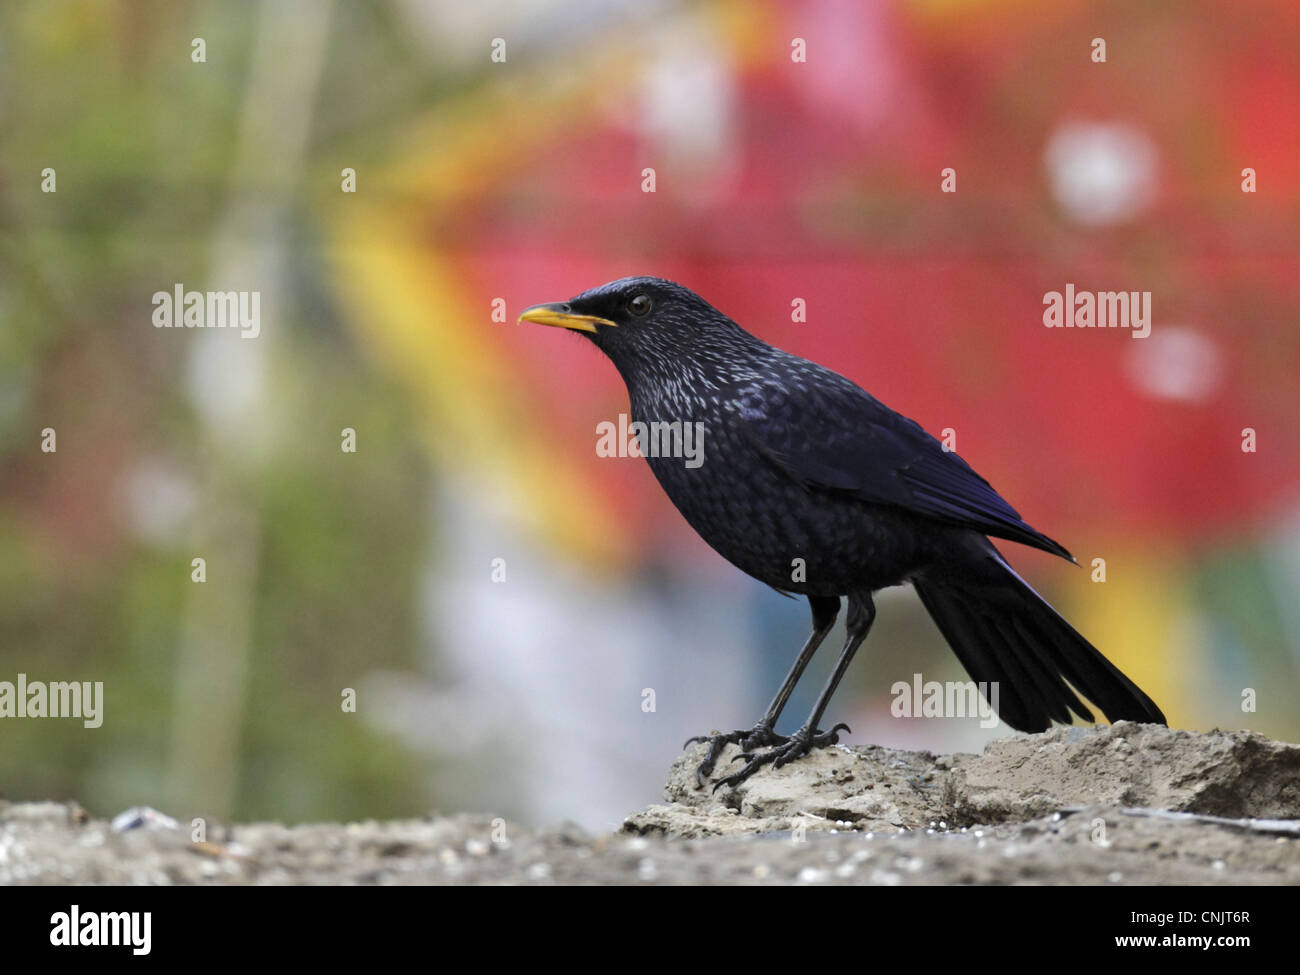 Blue Whistling-thrush (Myiophonus caeruleus) adult, standing with prayer flags in background, Yunnan, China, may Stock Photo